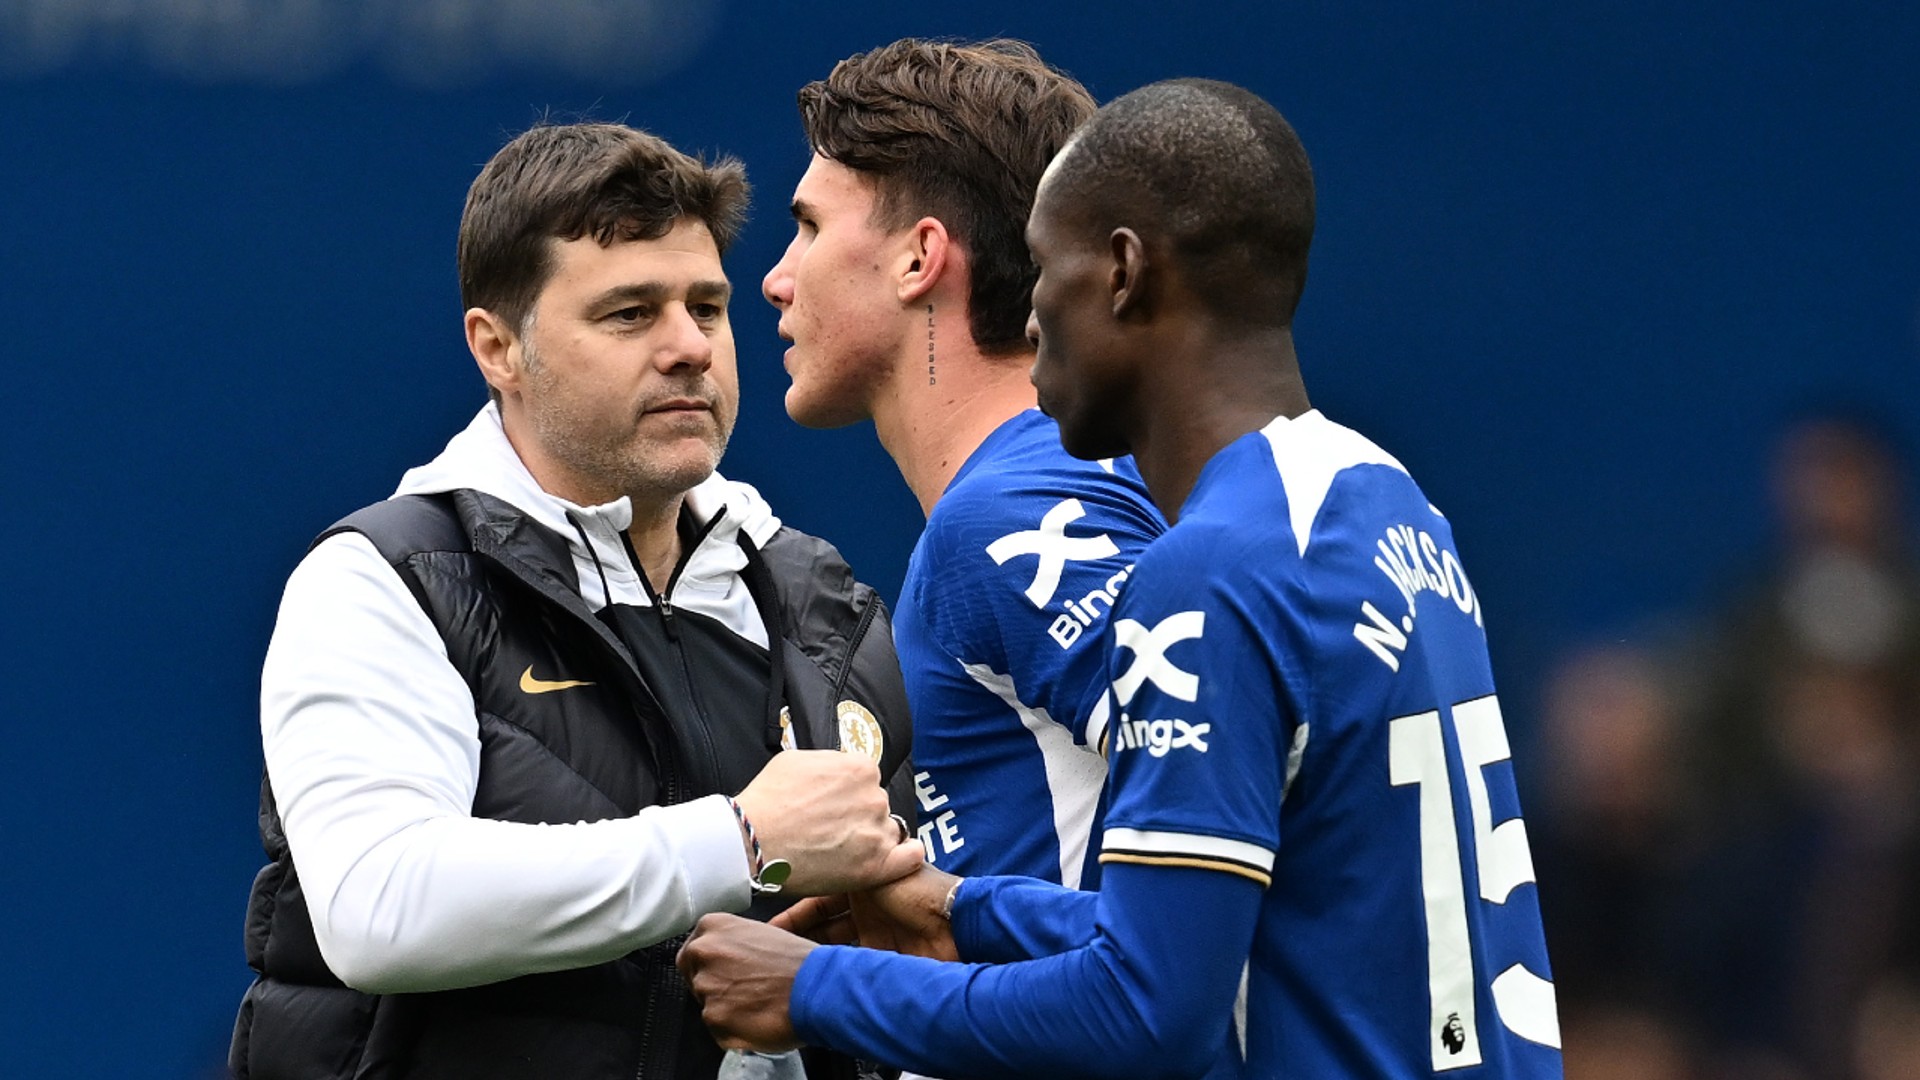 Poch hails Chelsea's growth